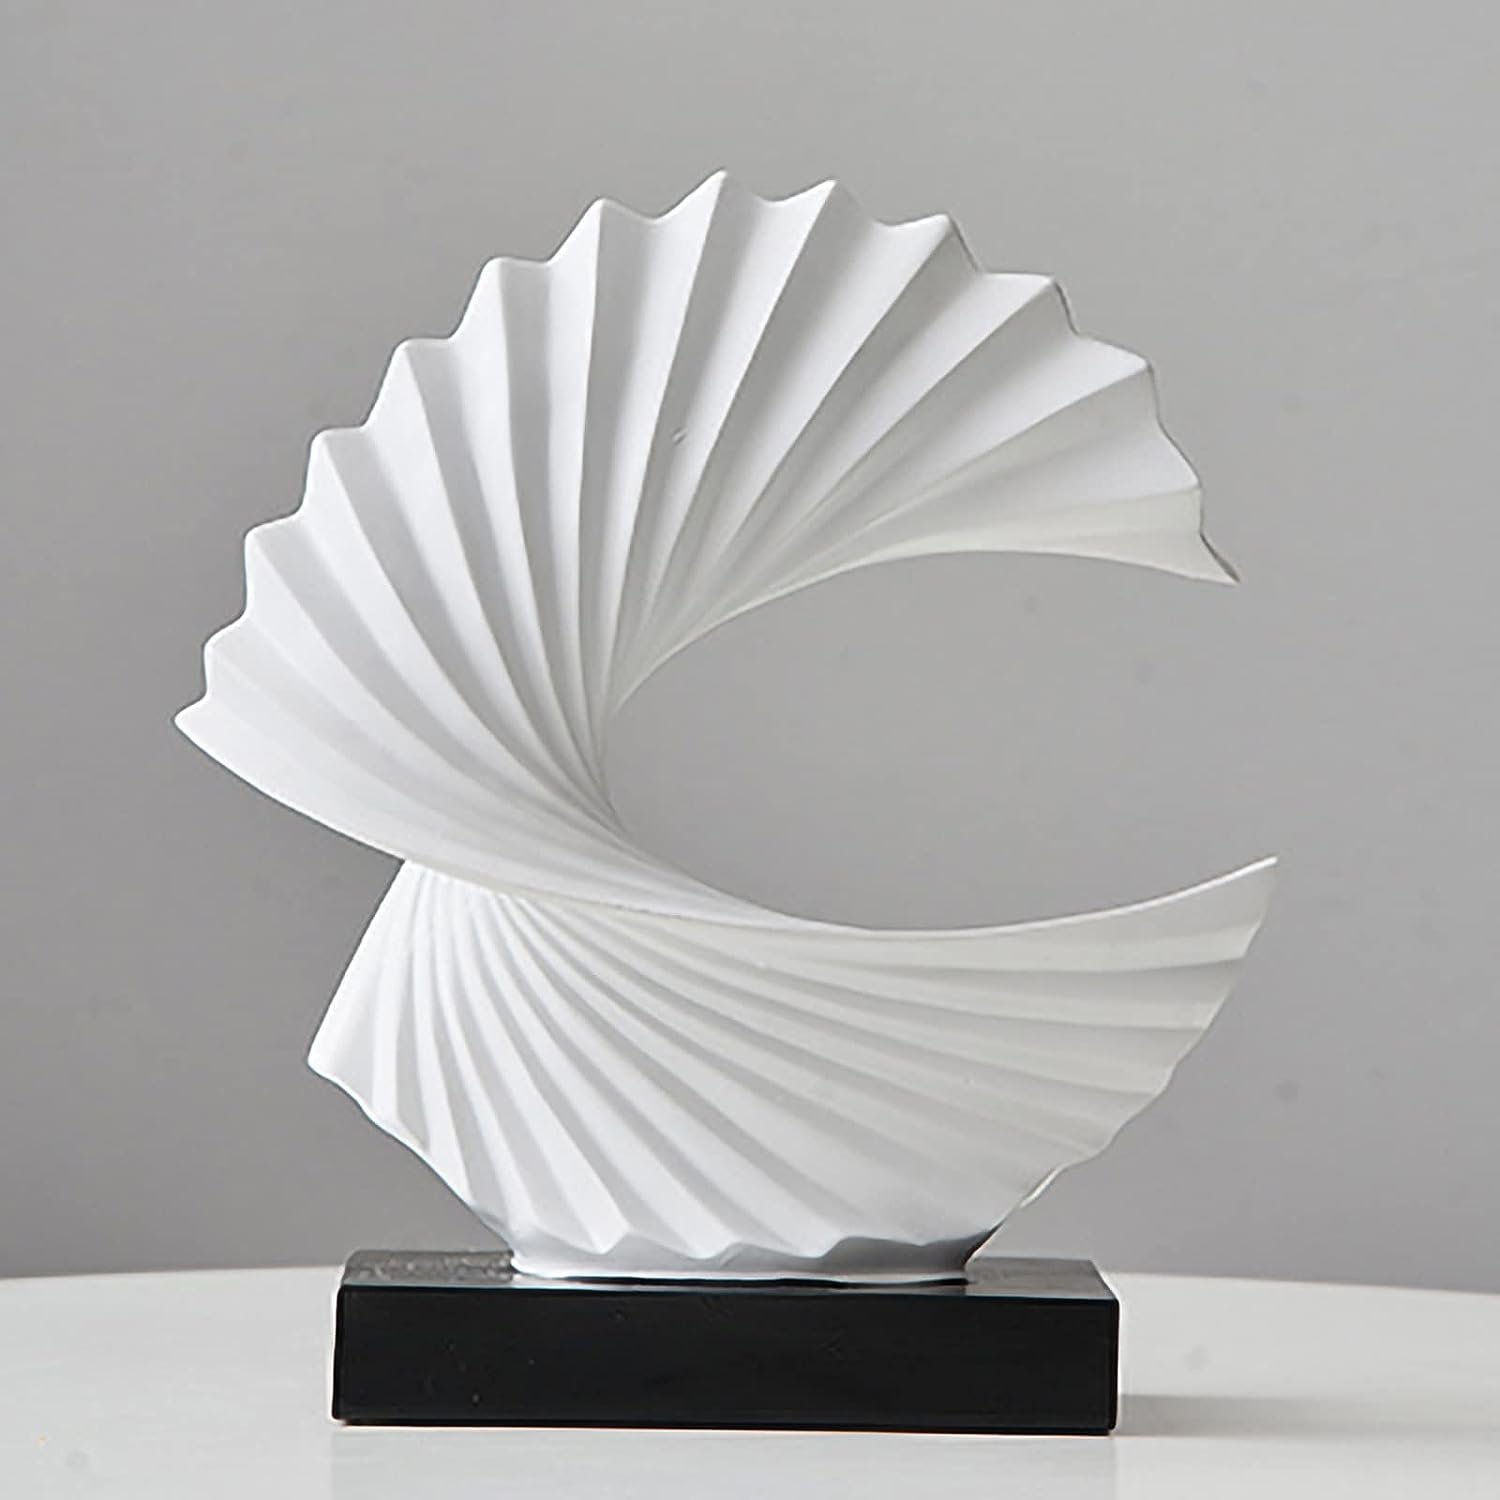 Wings Resin Statue Modern Abstract Home Decor Accents